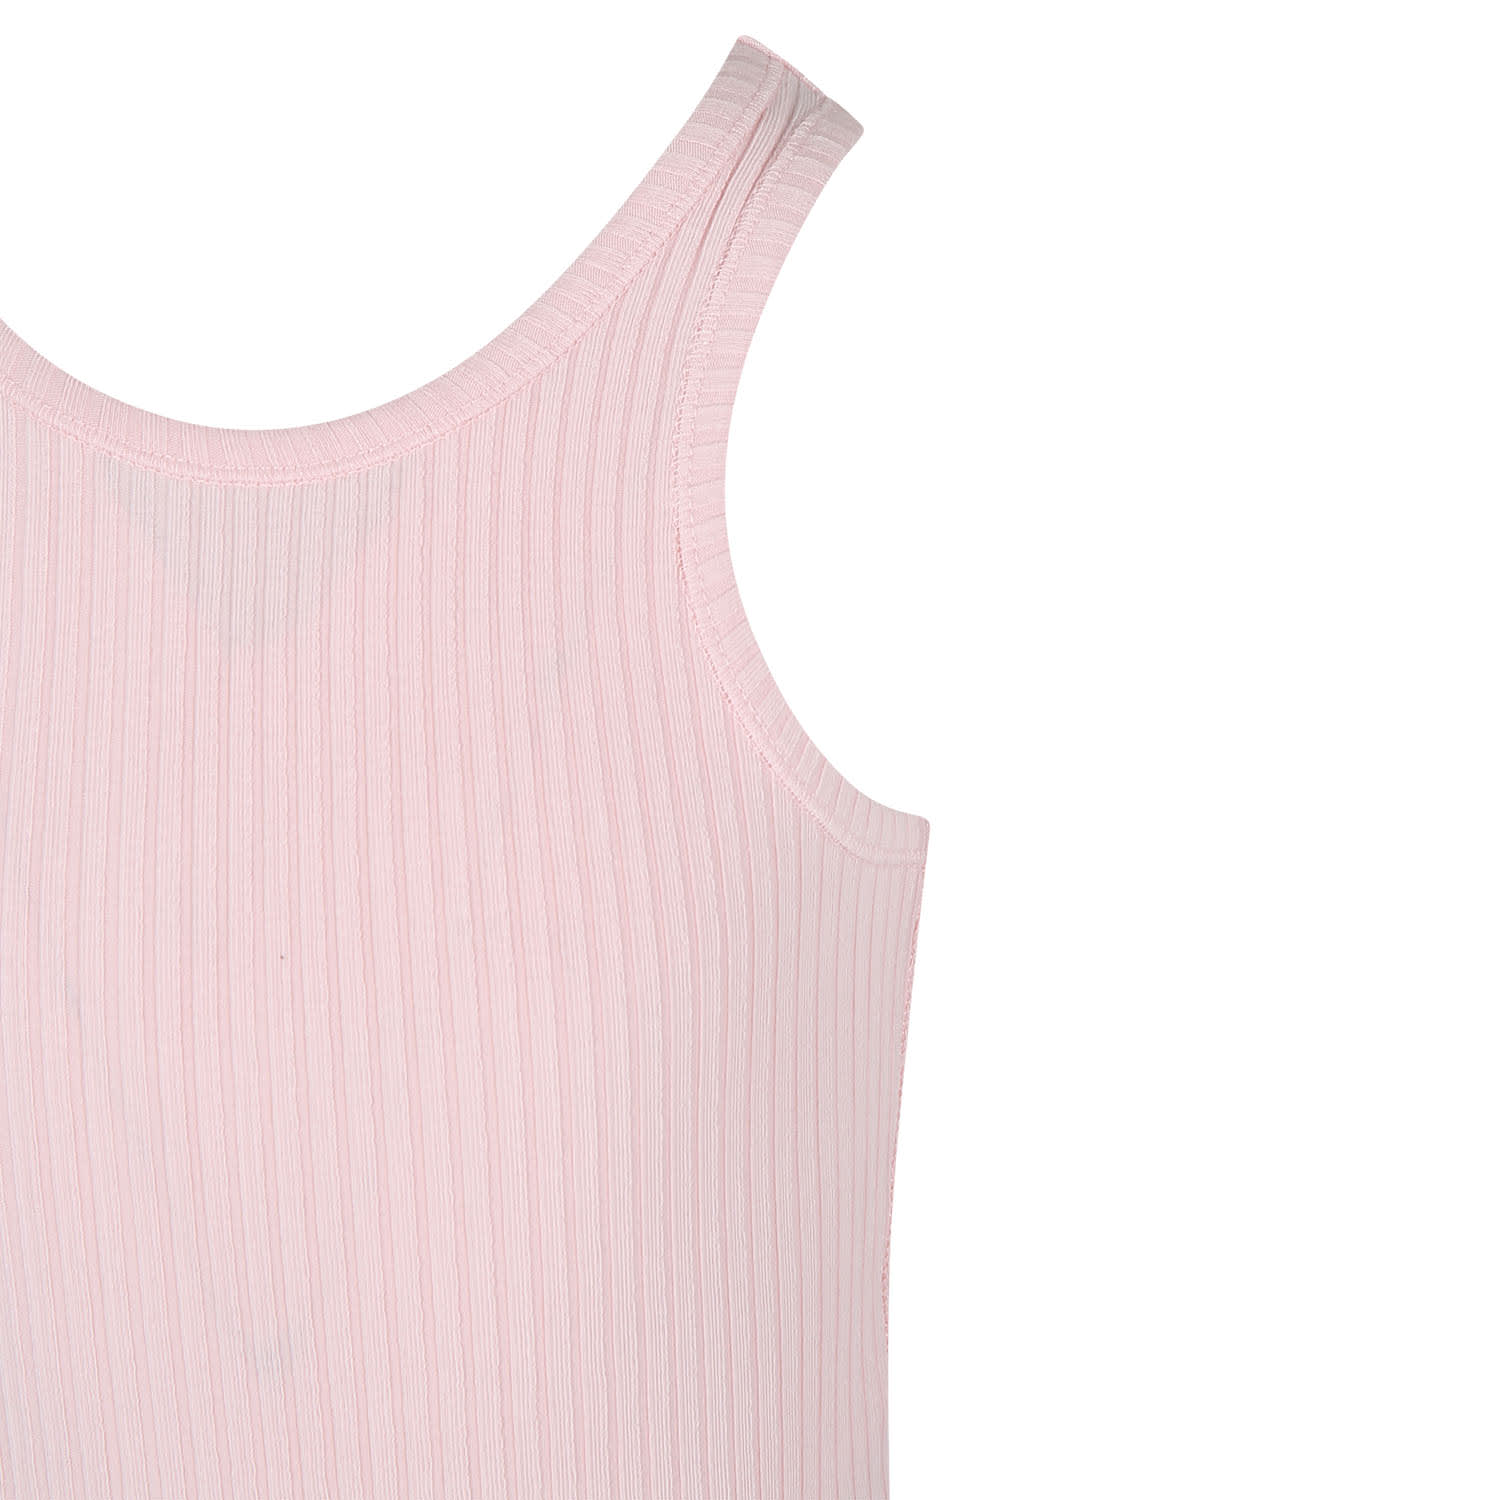 Shop Molo Pink Tank Top For Girl